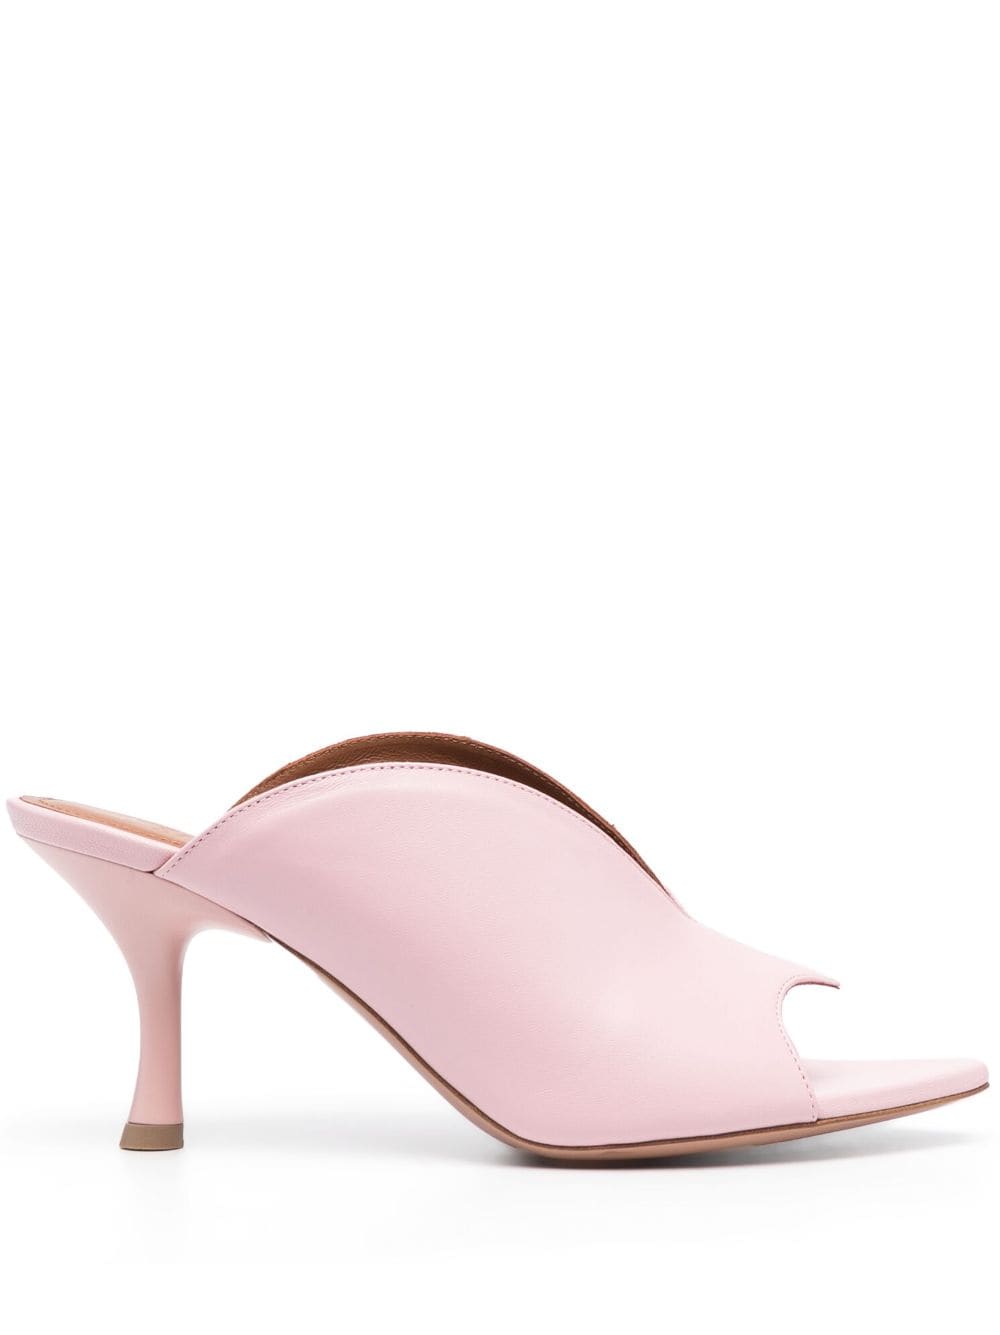 Malone Souliers 80mm Henri leather mules - Pink von Malone Souliers